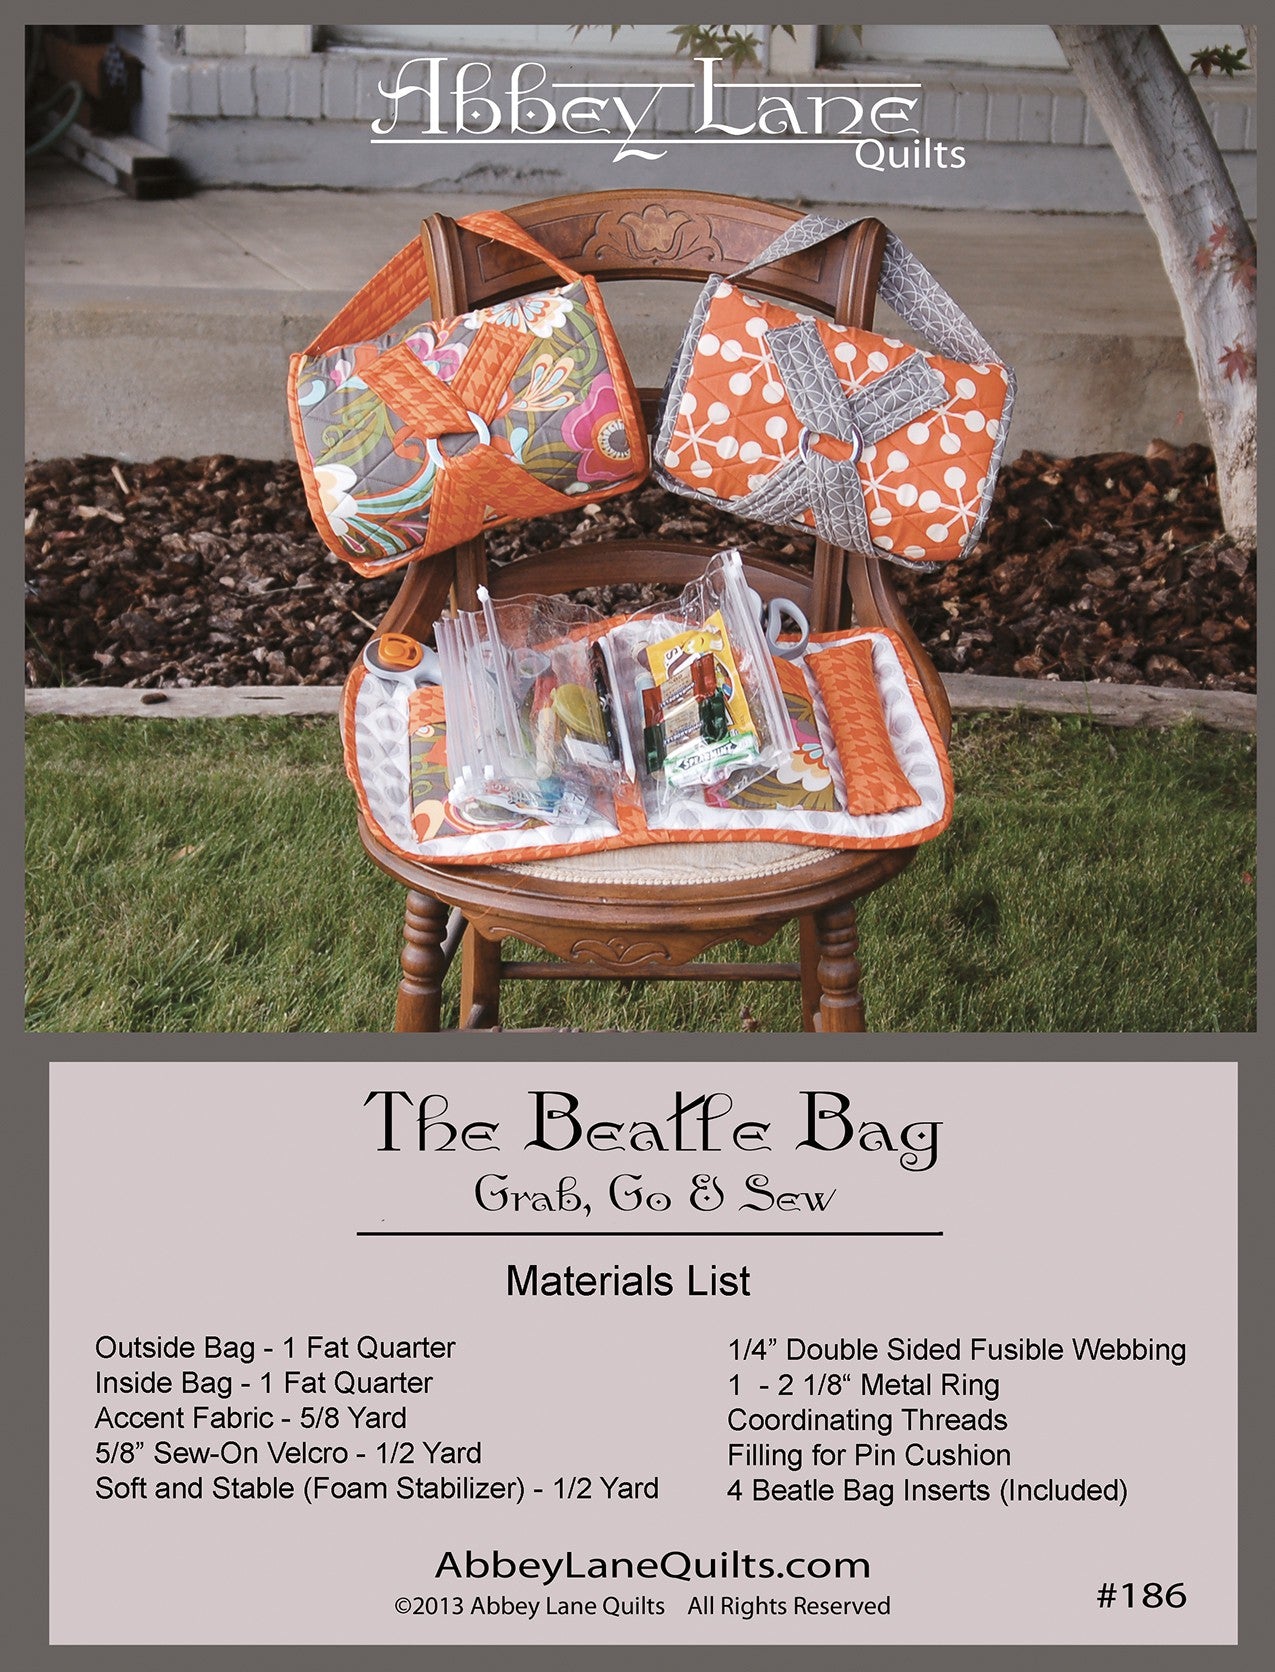 The Beatle Bag Sewing Pattern with Inserts by Marcea Owen and Janice Liljenquist for Abbey Lane Quilts